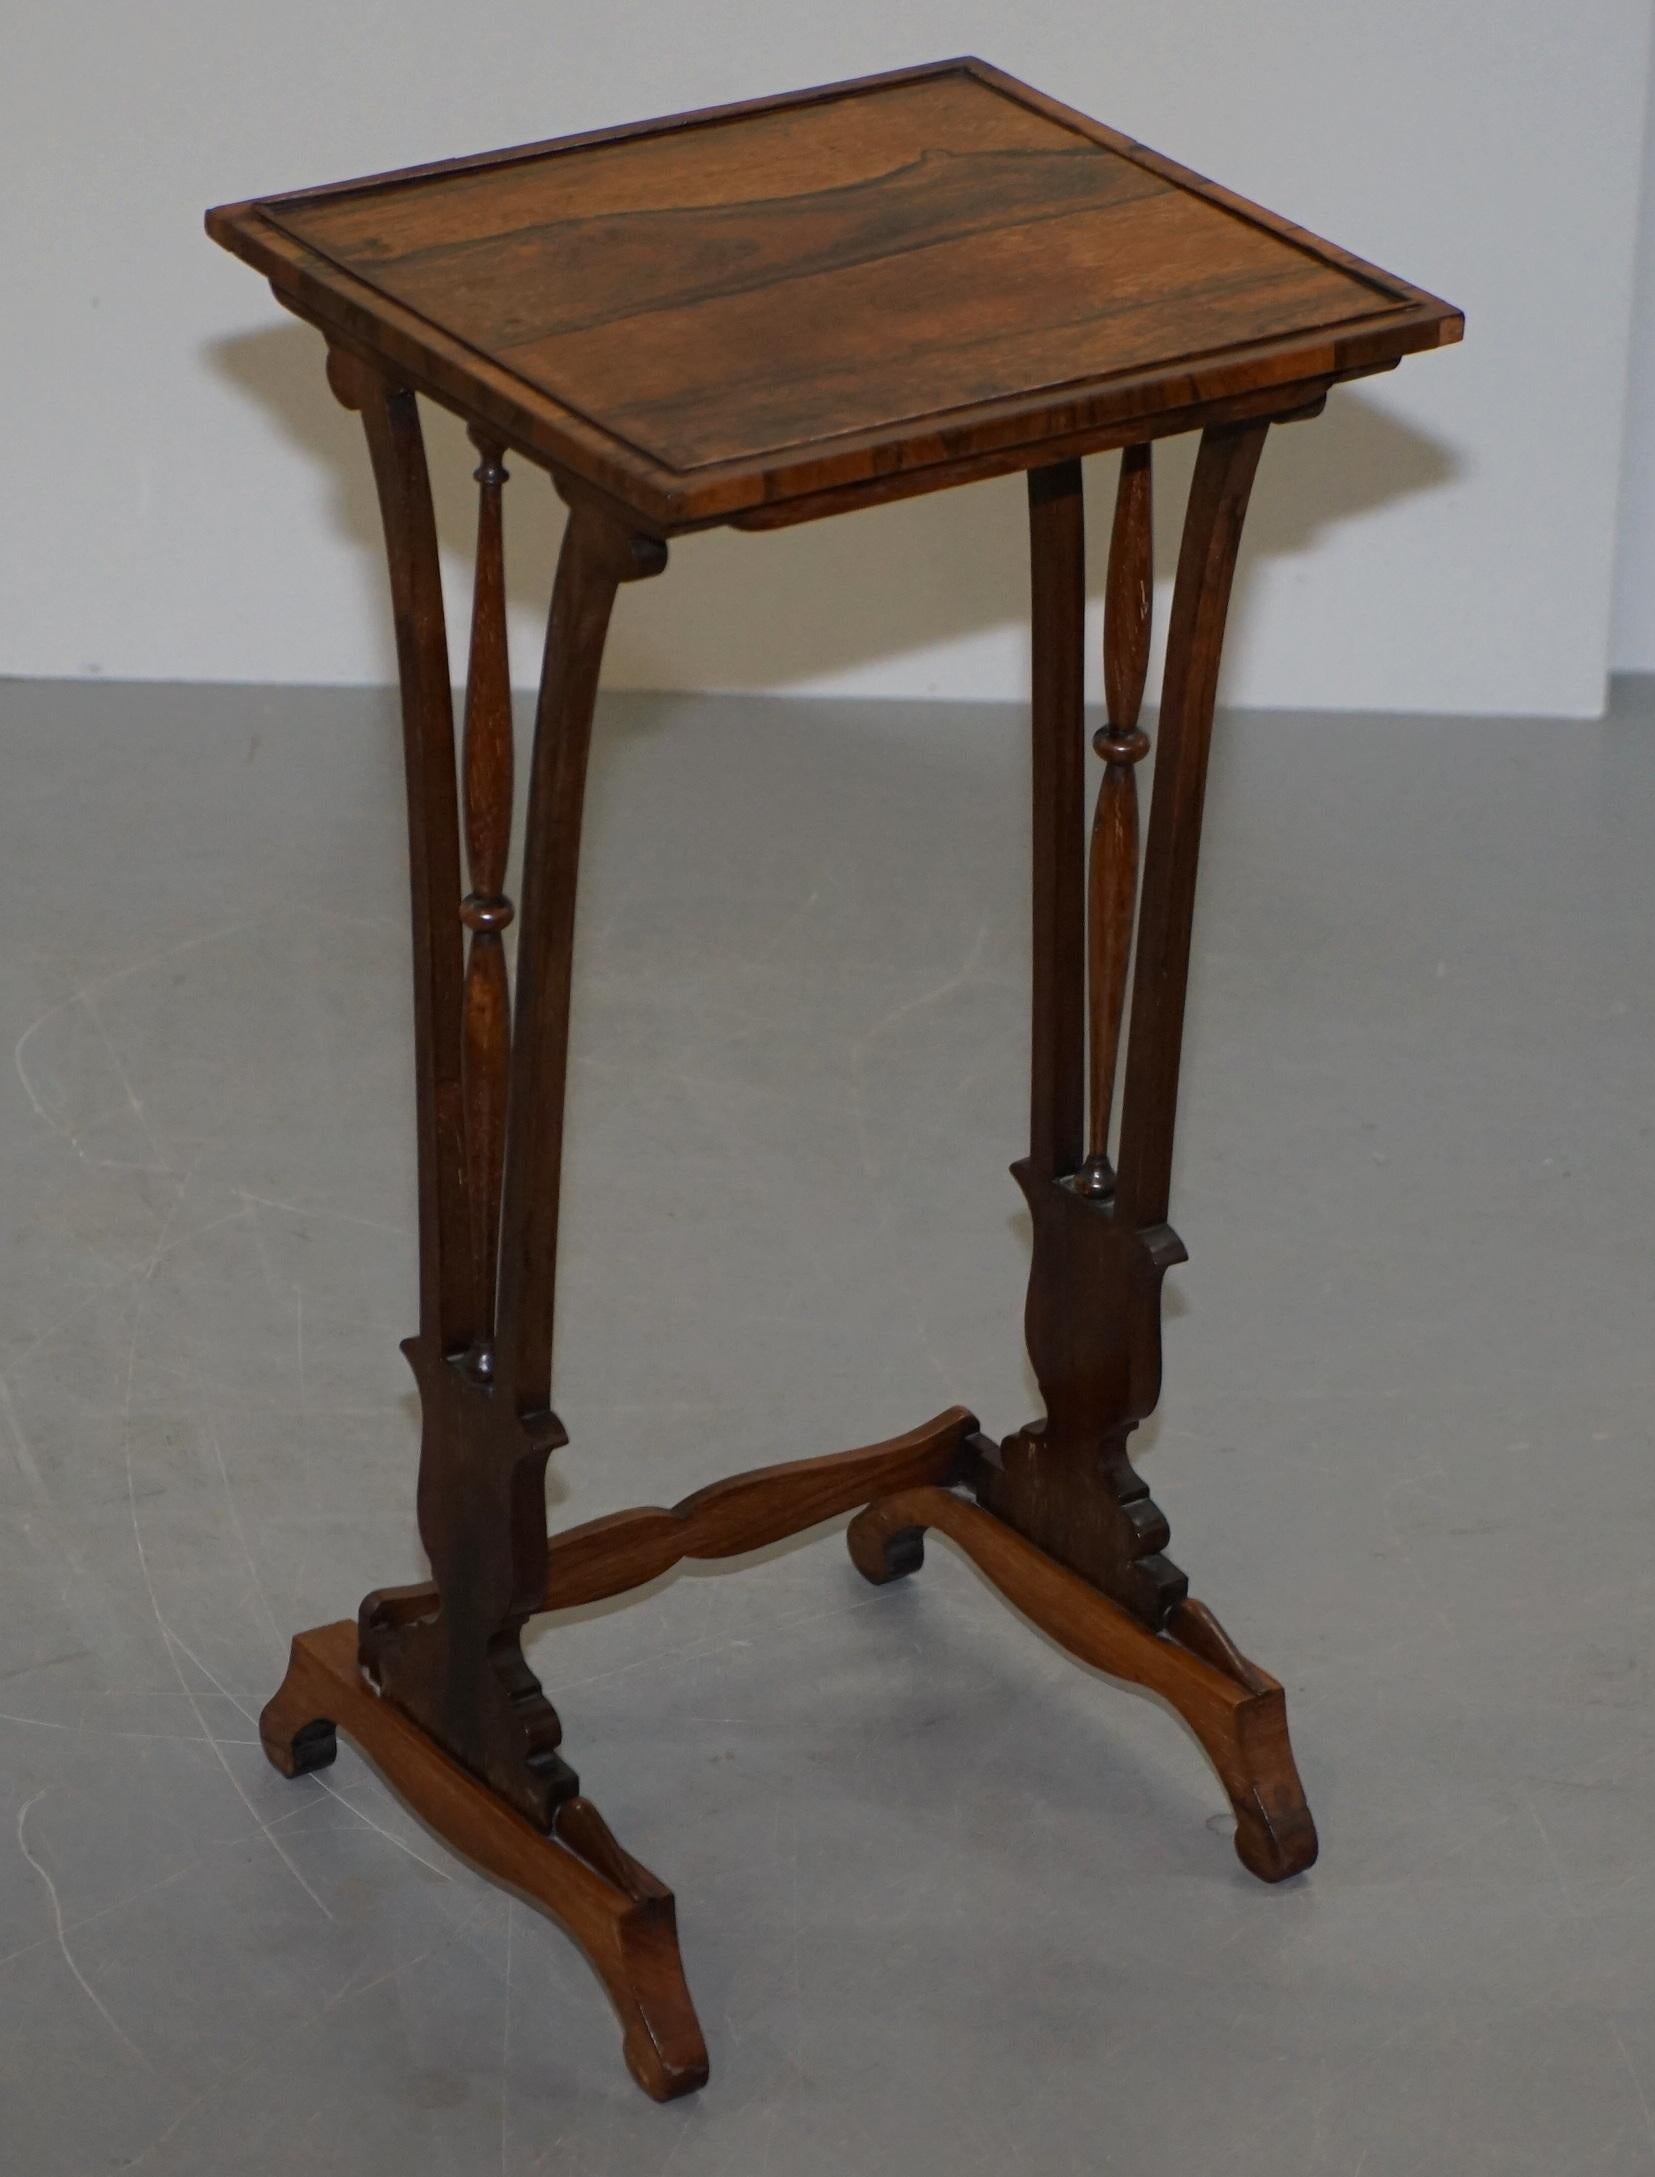 Fine Regency Nest of Hardwood Tables with Chessboard Top Attributed to Gillows For Sale 14